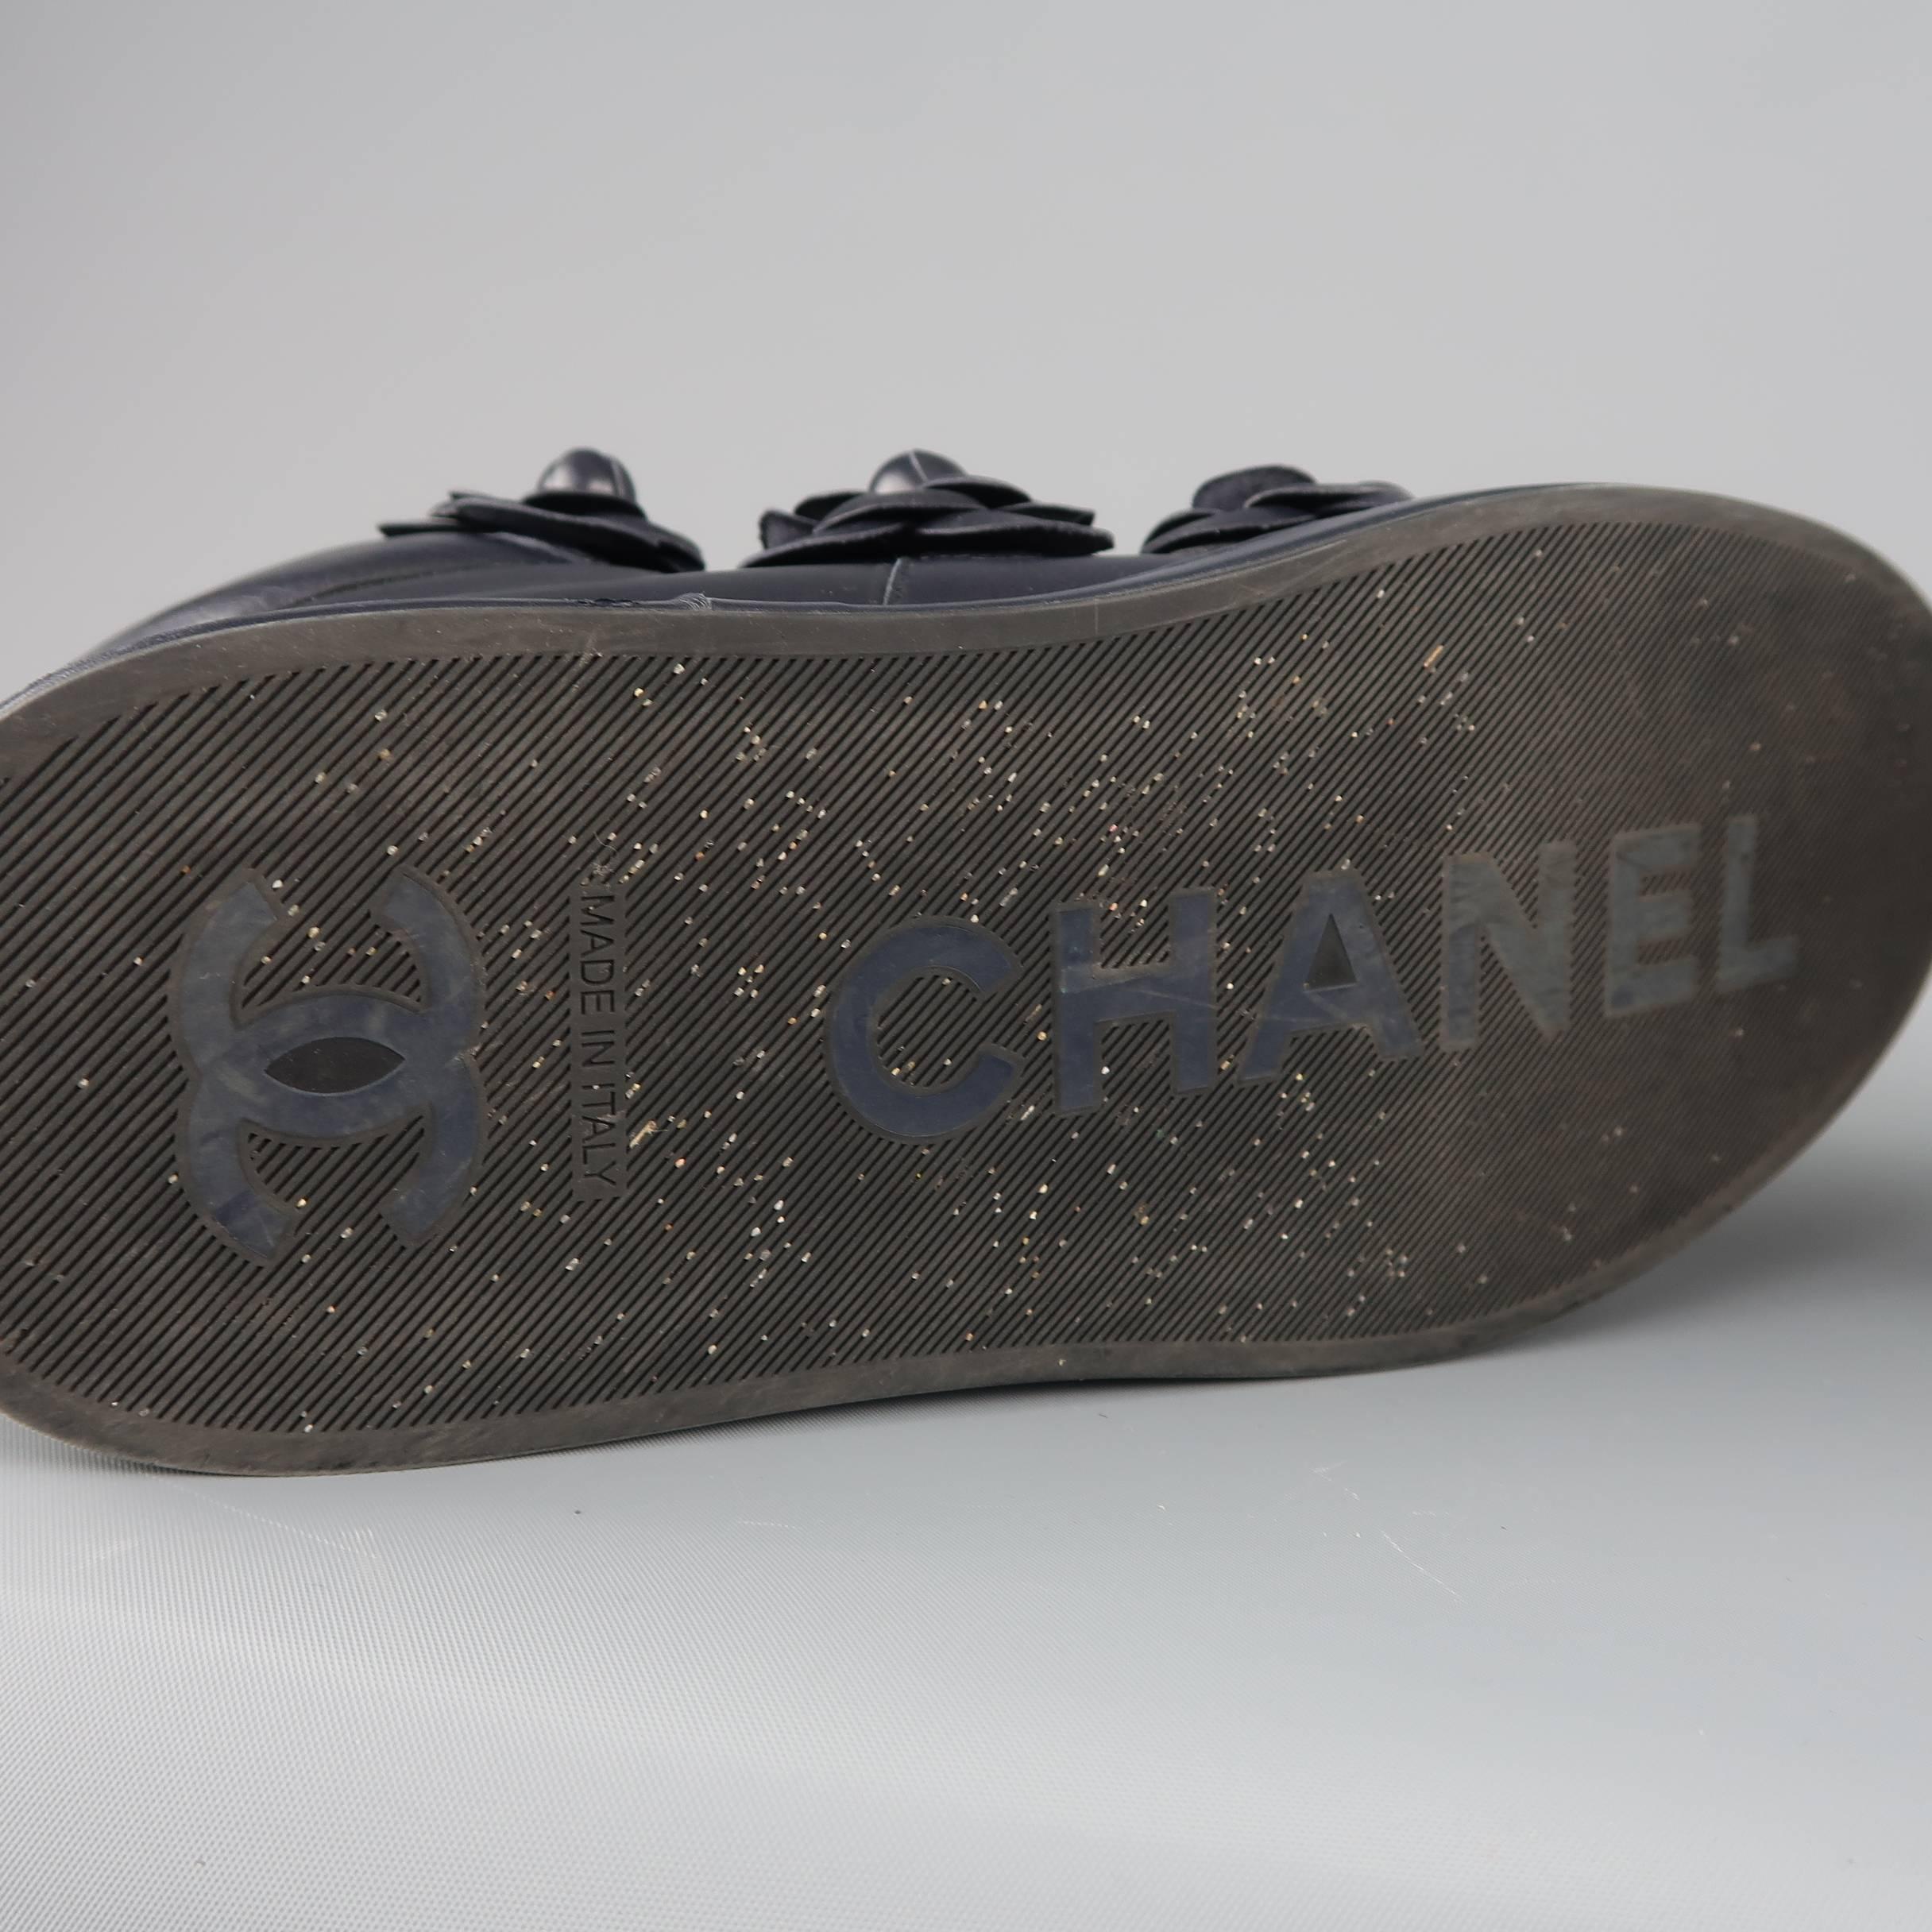 Chanel Sneakers - Navy Leather Camellia Pearl Stud High Top Shoes 7